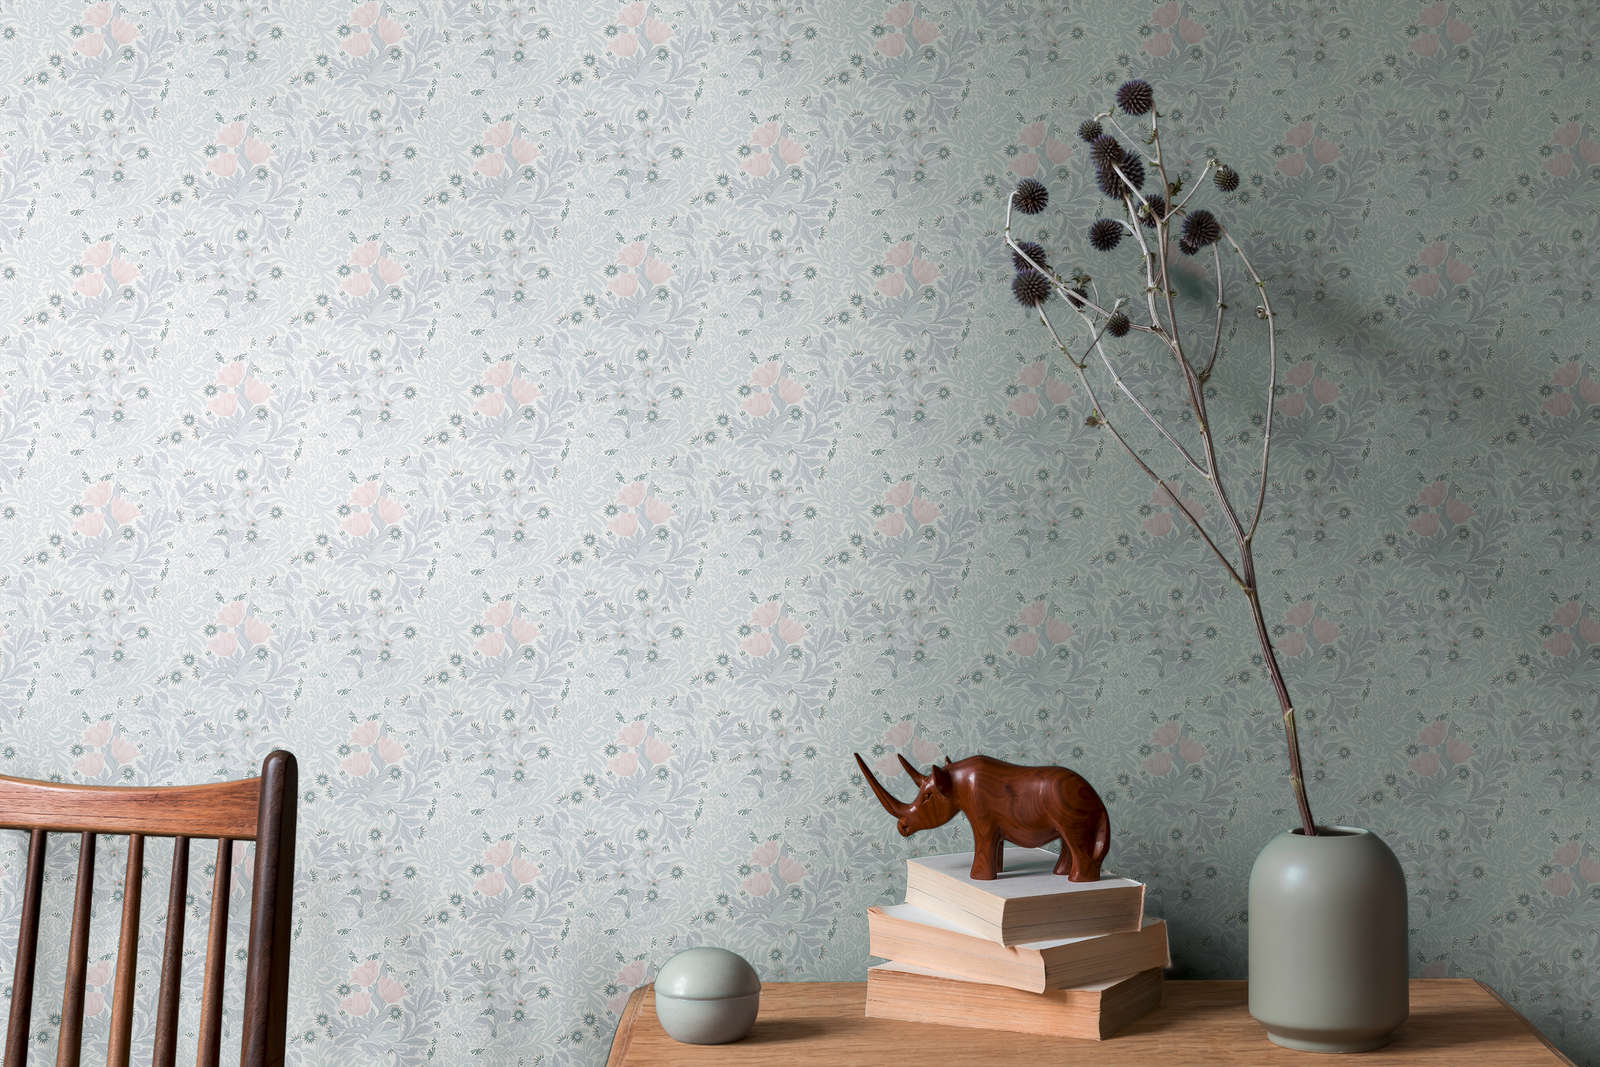             Non-woven wallpaper with floral pattern in soft shades - grey, pink, white
        